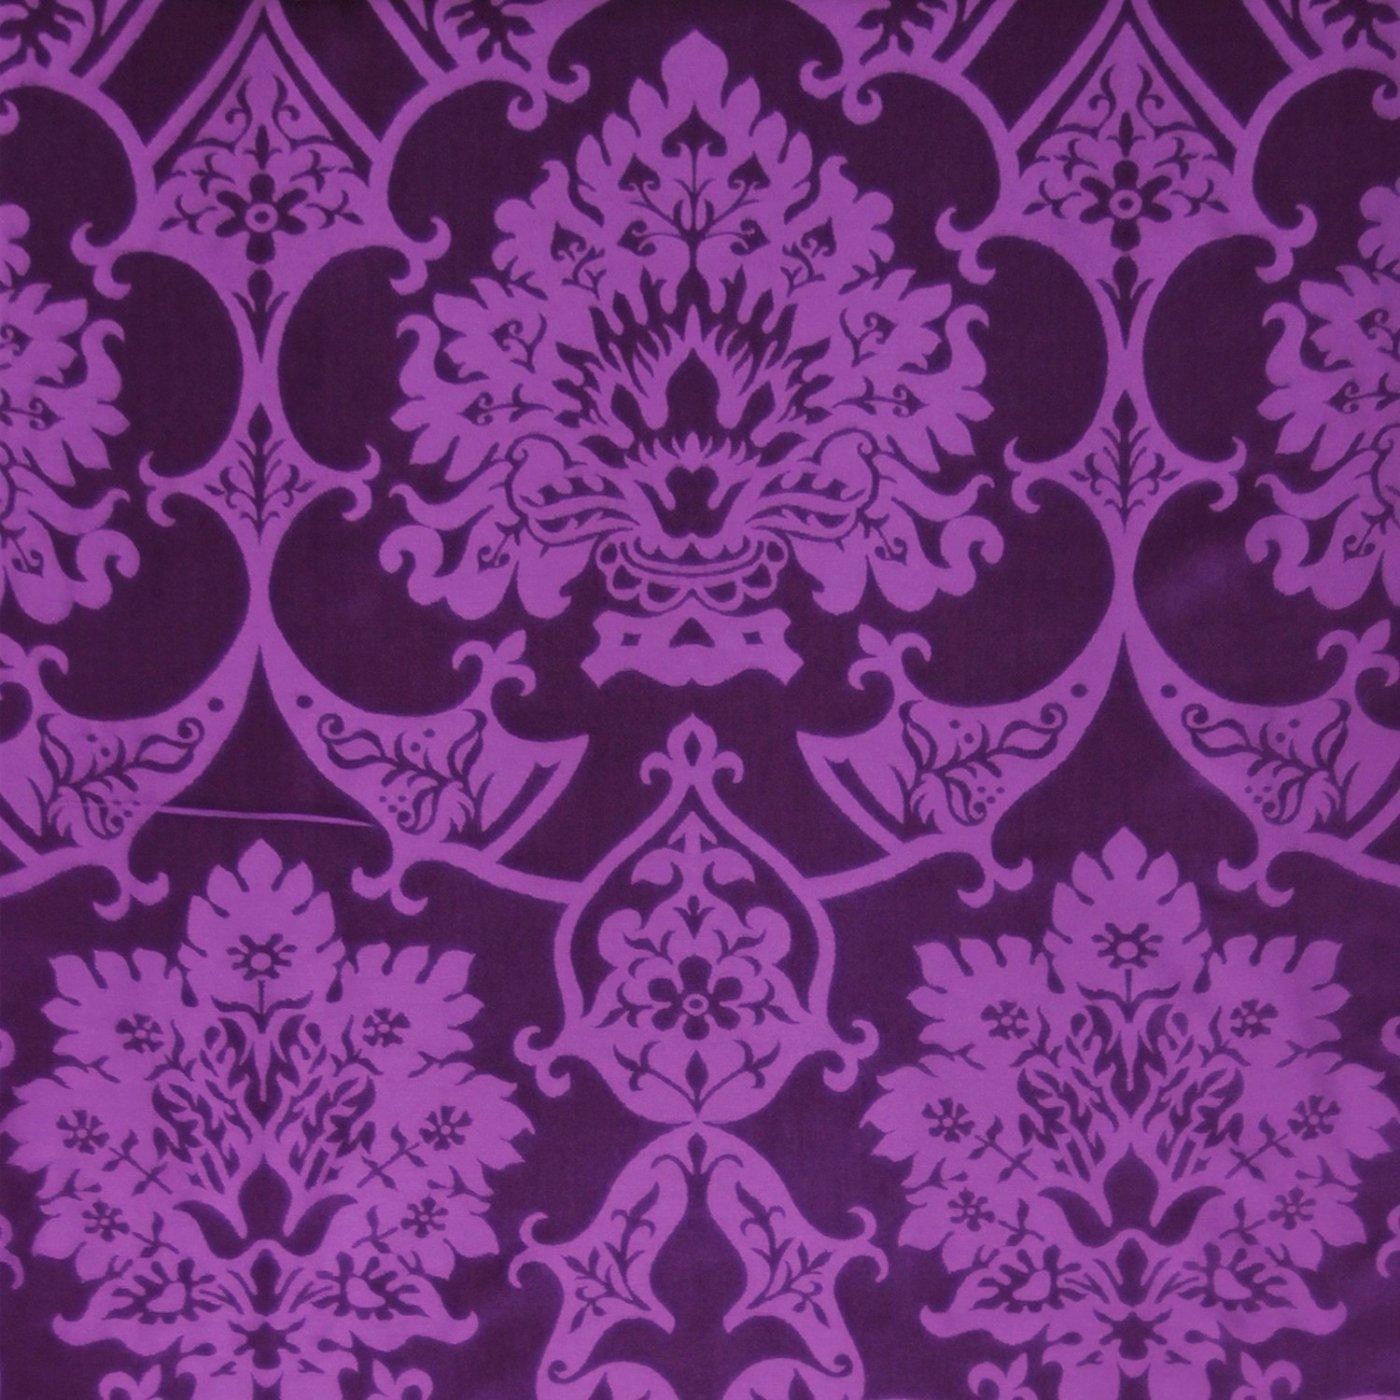 Abbey Cope in Blue Bellini with Comper Purple Gothic Orphreys - Watts & Co. (international)